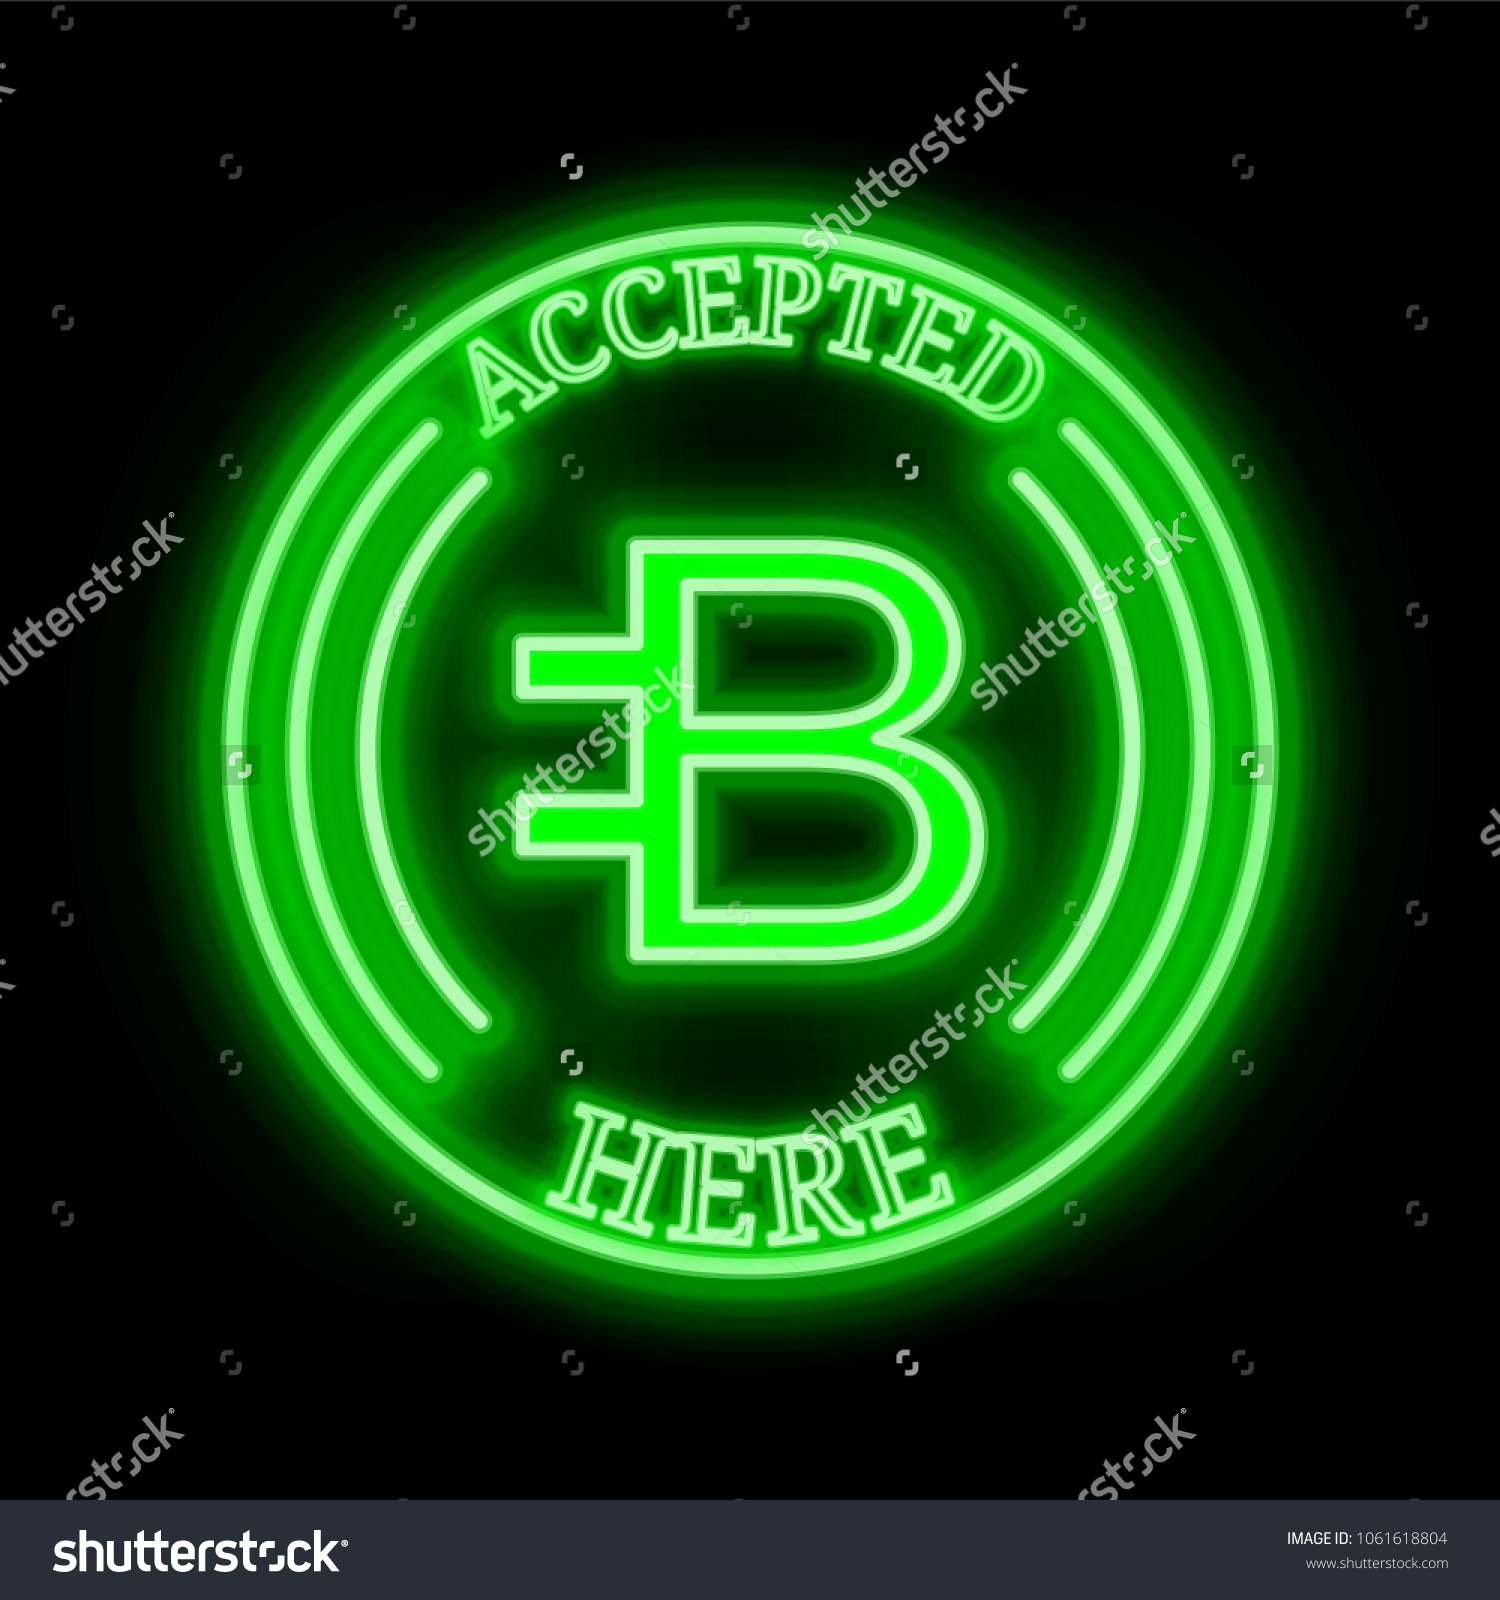 SVG of Bytecoin (BCN) green  neon cryptocurrency symbol in round frame with text 